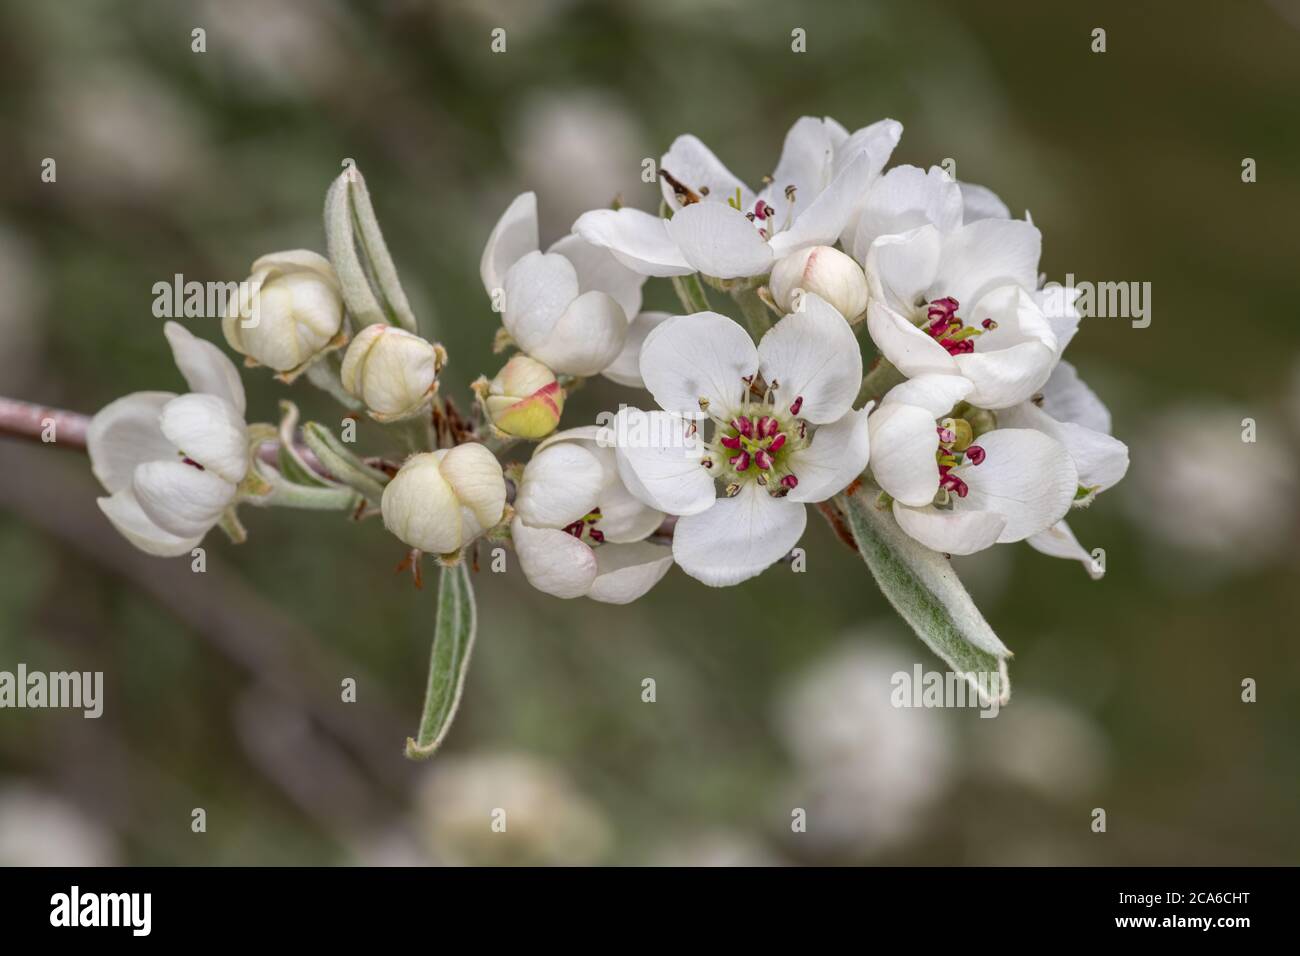 Flowers of Weeping Willow-Leafed Pear (Pyrus salicifolia 'Pendula') Stock Photo